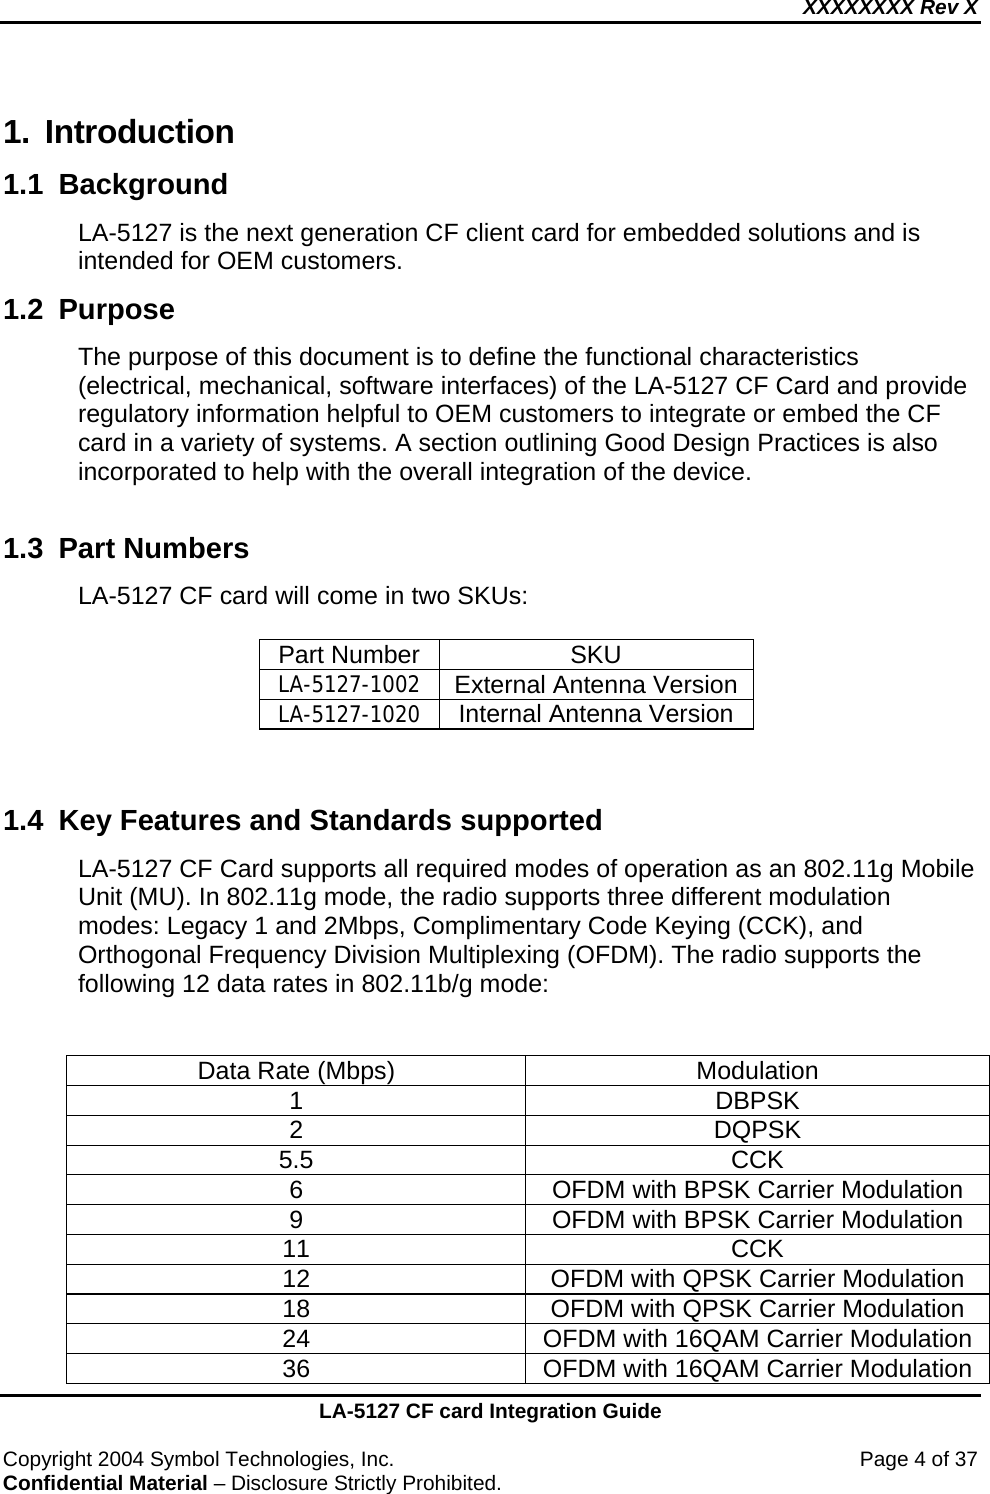 XXXXXXXX Rev X    LA-5127 CF card Integration Guide  Copyright 2004 Symbol Technologies, Inc.    Page 4 of 37 Confidential Material – Disclosure Strictly Prohibited. 1. Introduction 1.1 Background  LA-5127 is the next generation CF client card for embedded solutions and is intended for OEM customers. 1.2 Purpose  The purpose of this document is to define the functional characteristics (electrical, mechanical, software interfaces) of the LA-5127 CF Card and provide regulatory information helpful to OEM customers to integrate or embed the CF card in a variety of systems. A section outlining Good Design Practices is also incorporated to help with the overall integration of the device.  1.3  Part Numbers  LA-5127 CF card will come in two SKUs:  Part Number  SKU LA-5127-1002 External Antenna Version LA-5127-1020  Internal Antenna Version   1.4  Key Features and Standards supported LA-5127 CF Card supports all required modes of operation as an 802.11g Mobile Unit (MU). In 802.11g mode, the radio supports three different modulation modes: Legacy 1 and 2Mbps, Complimentary Code Keying (CCK), and Orthogonal Frequency Division Multiplexing (OFDM). The radio supports the following 12 data rates in 802.11b/g mode:   Data Rate (Mbps)  Modulation 1 DBPSK 2 DQPSK 5.5 CCK 6  OFDM with BPSK Carrier Modulation 9  OFDM with BPSK Carrier Modulation 11 CCK 12  OFDM with QPSK Carrier Modulation 18  OFDM with QPSK Carrier Modulation 24  OFDM with 16QAM Carrier Modulation 36  OFDM with 16QAM Carrier Modulation 